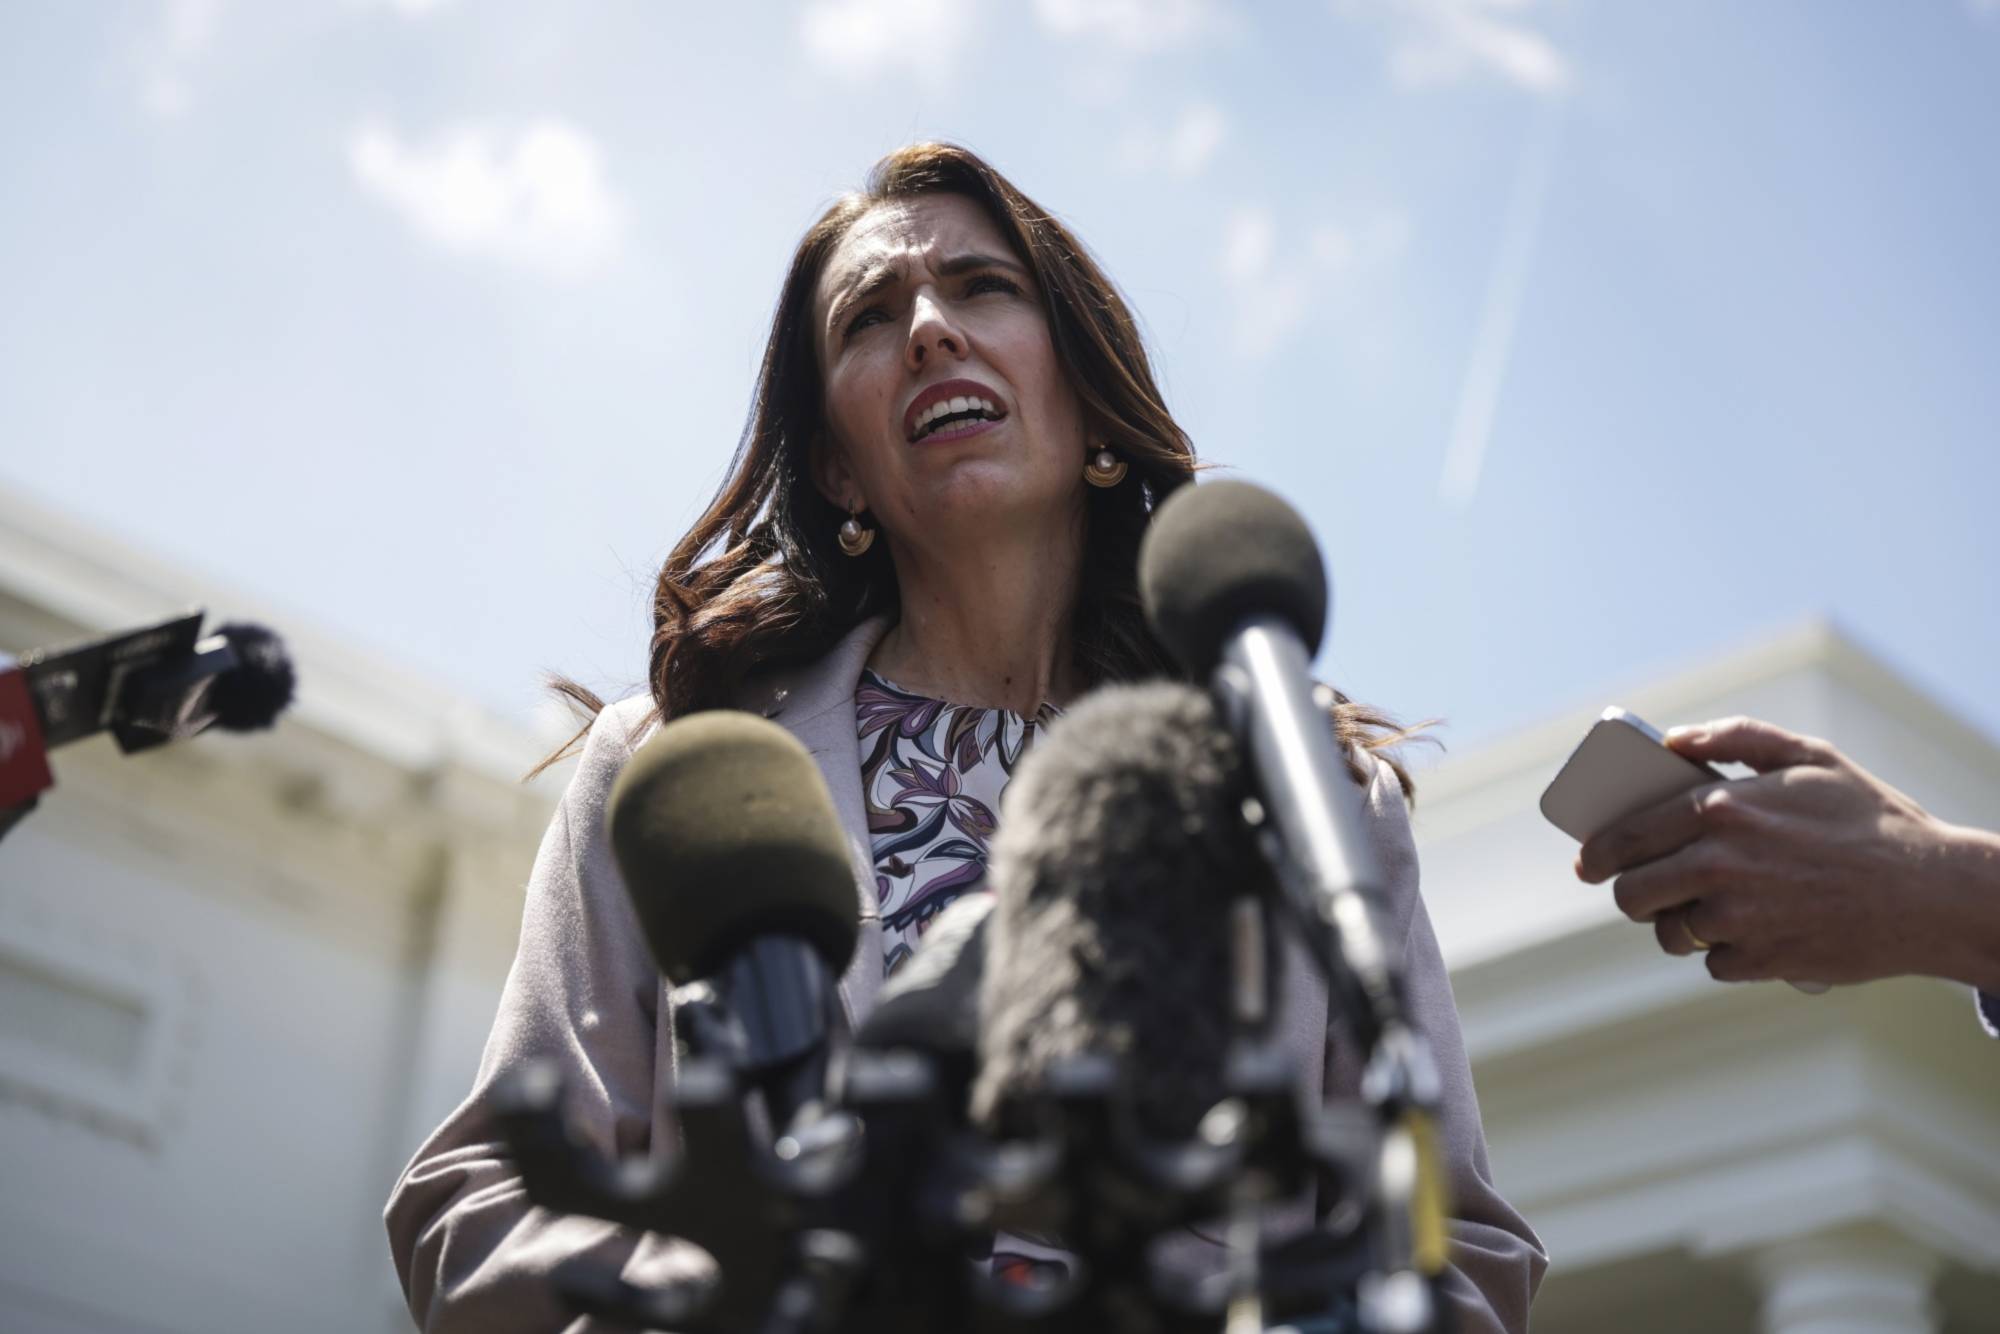 New Zealand’s charismatic prime minister, Jacinda Ardern, stepped down, citing fatigue and other factors. Many female politicians are plagued by double standards when it comes to how they are judged compared to their male counterparts. | BLOOMBERG